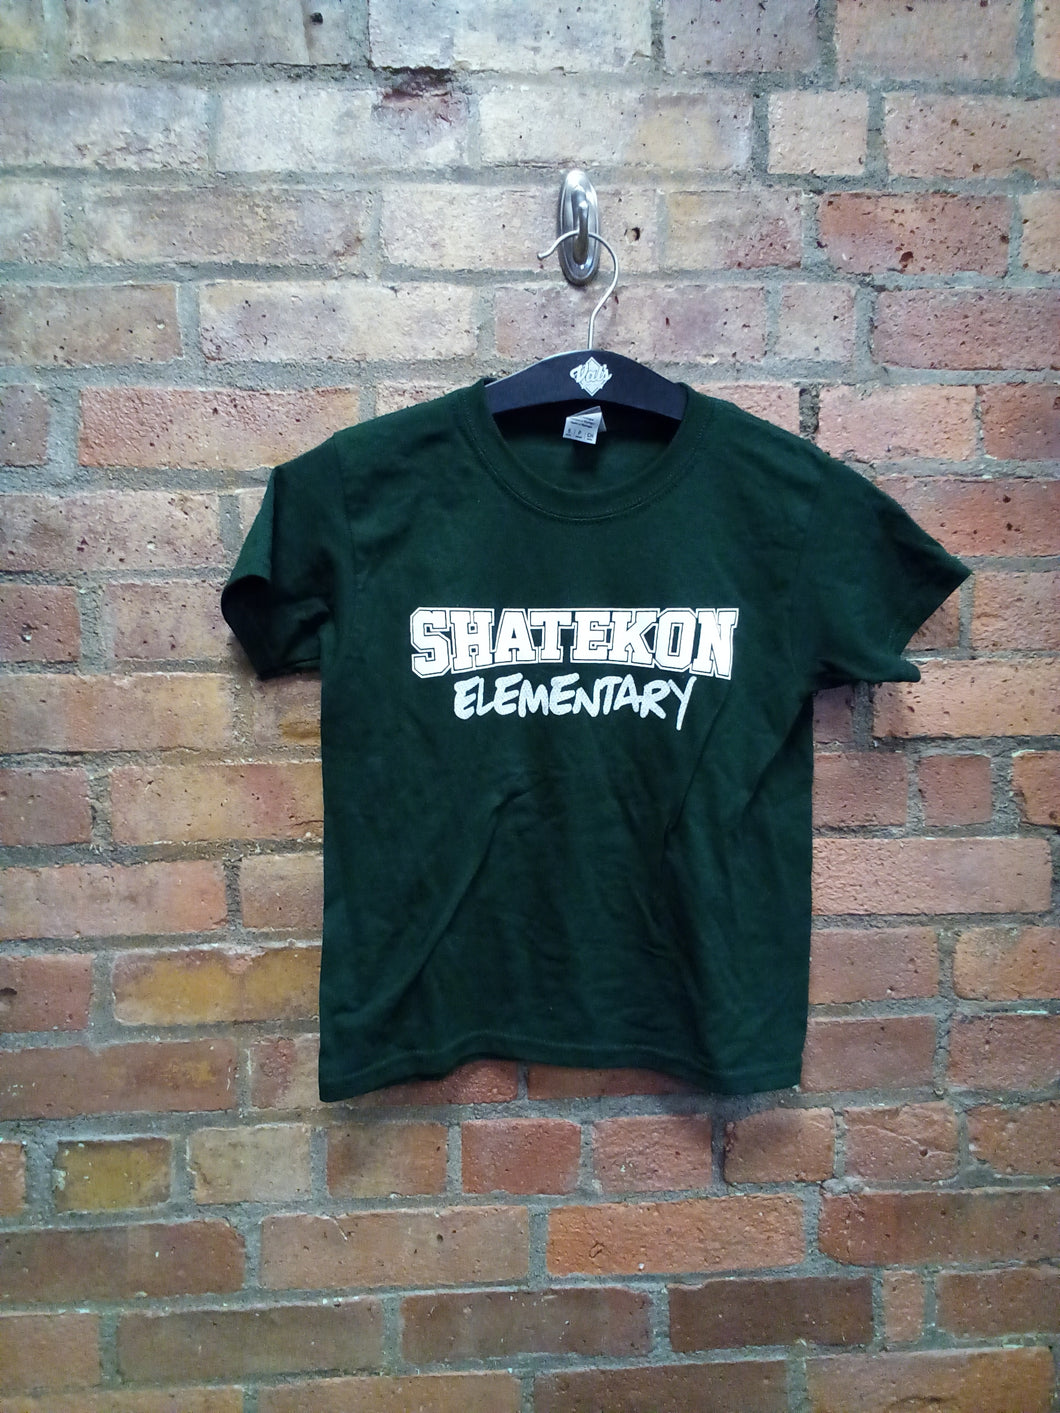 CLEARANCE - Shatekon Elementary Youth T-Shirt - Size Small